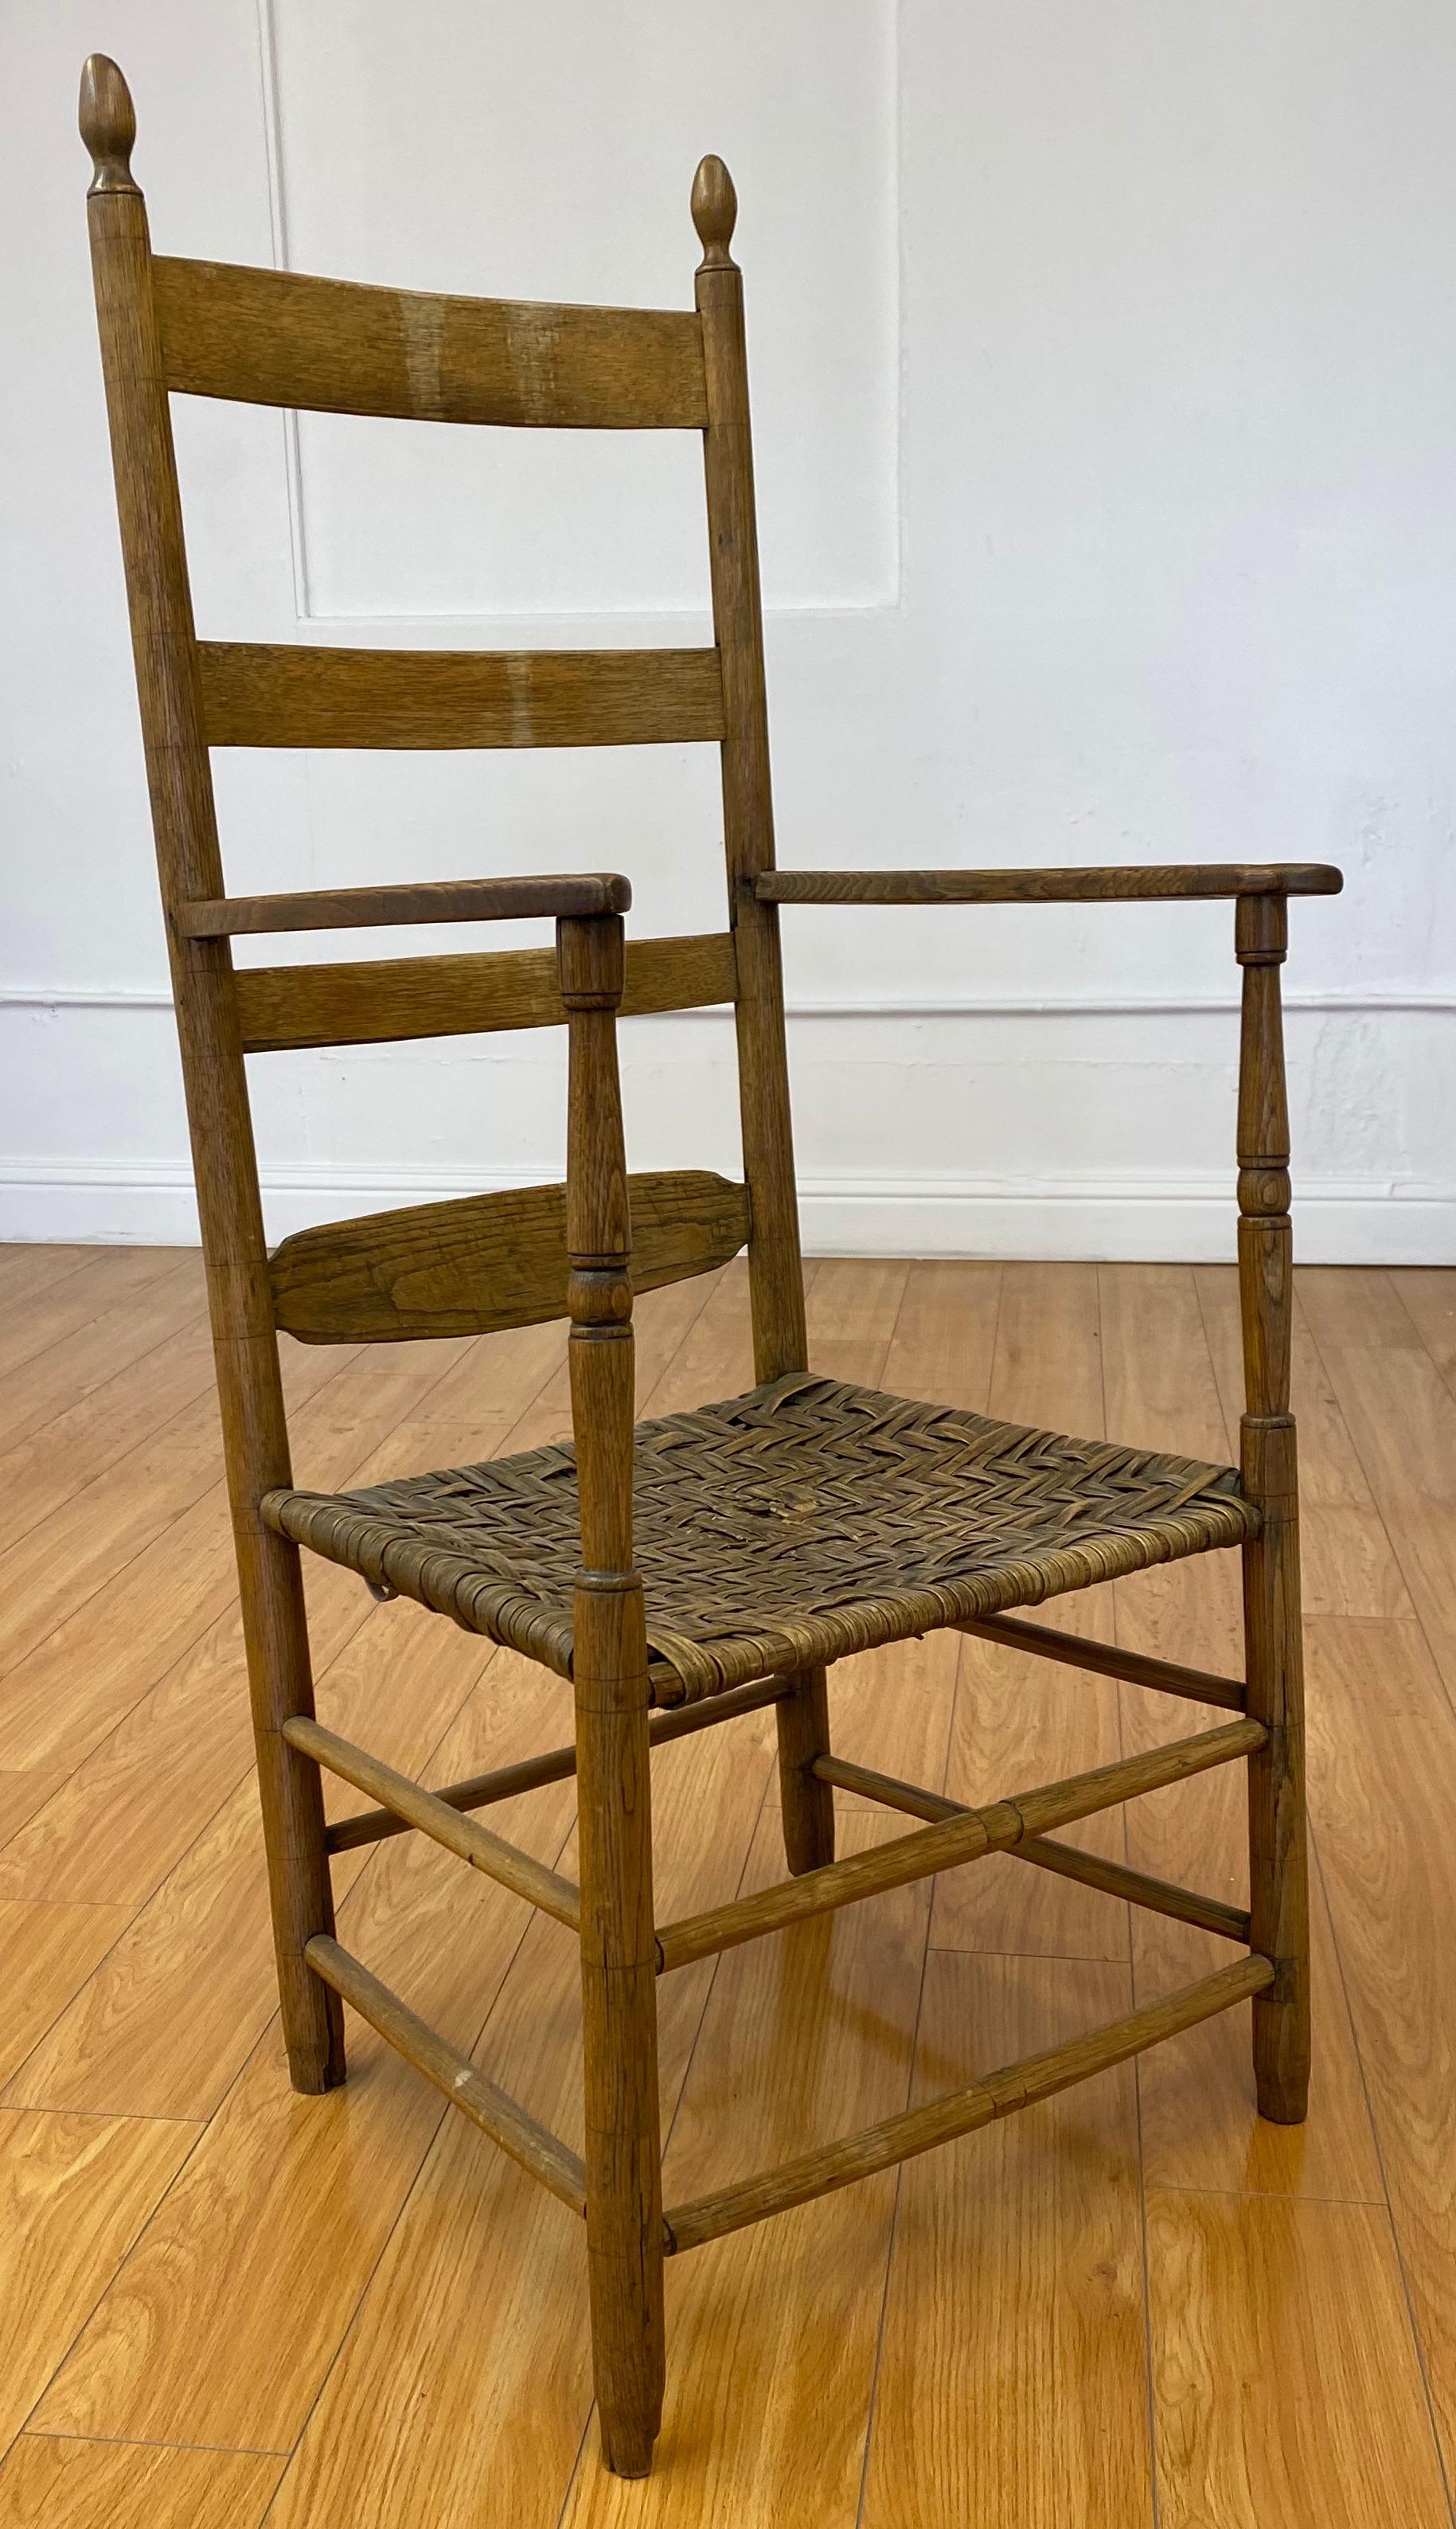 American 18th to 19th Century Ladder Back Chair with Reed Seat